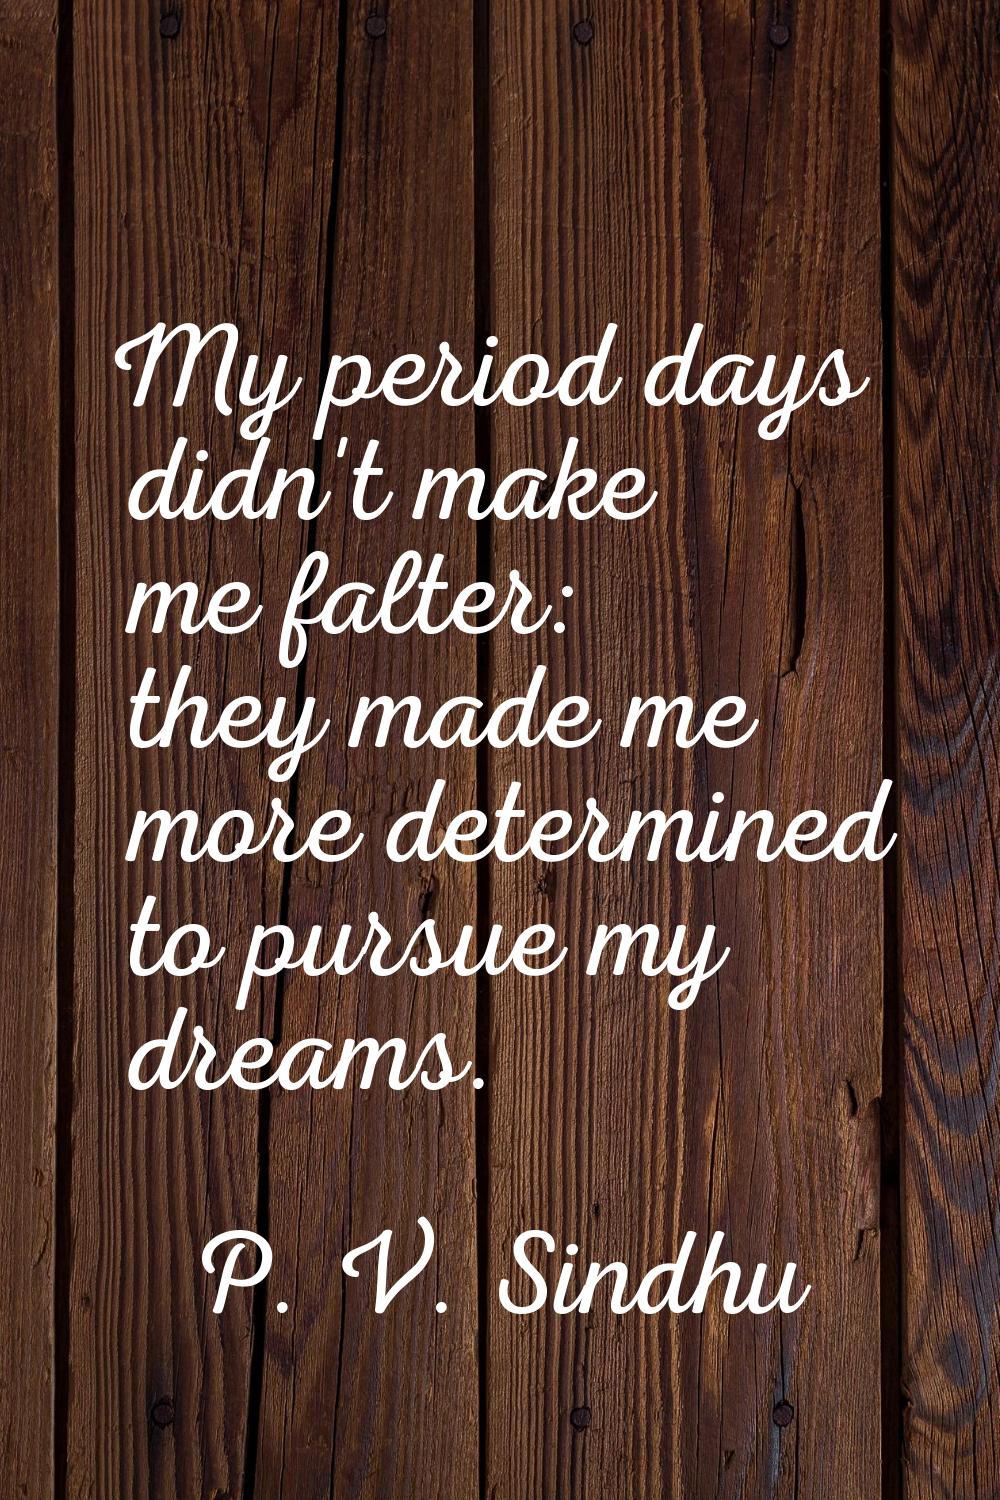 My period days didn't make me falter: they made me more determined to pursue my dreams.